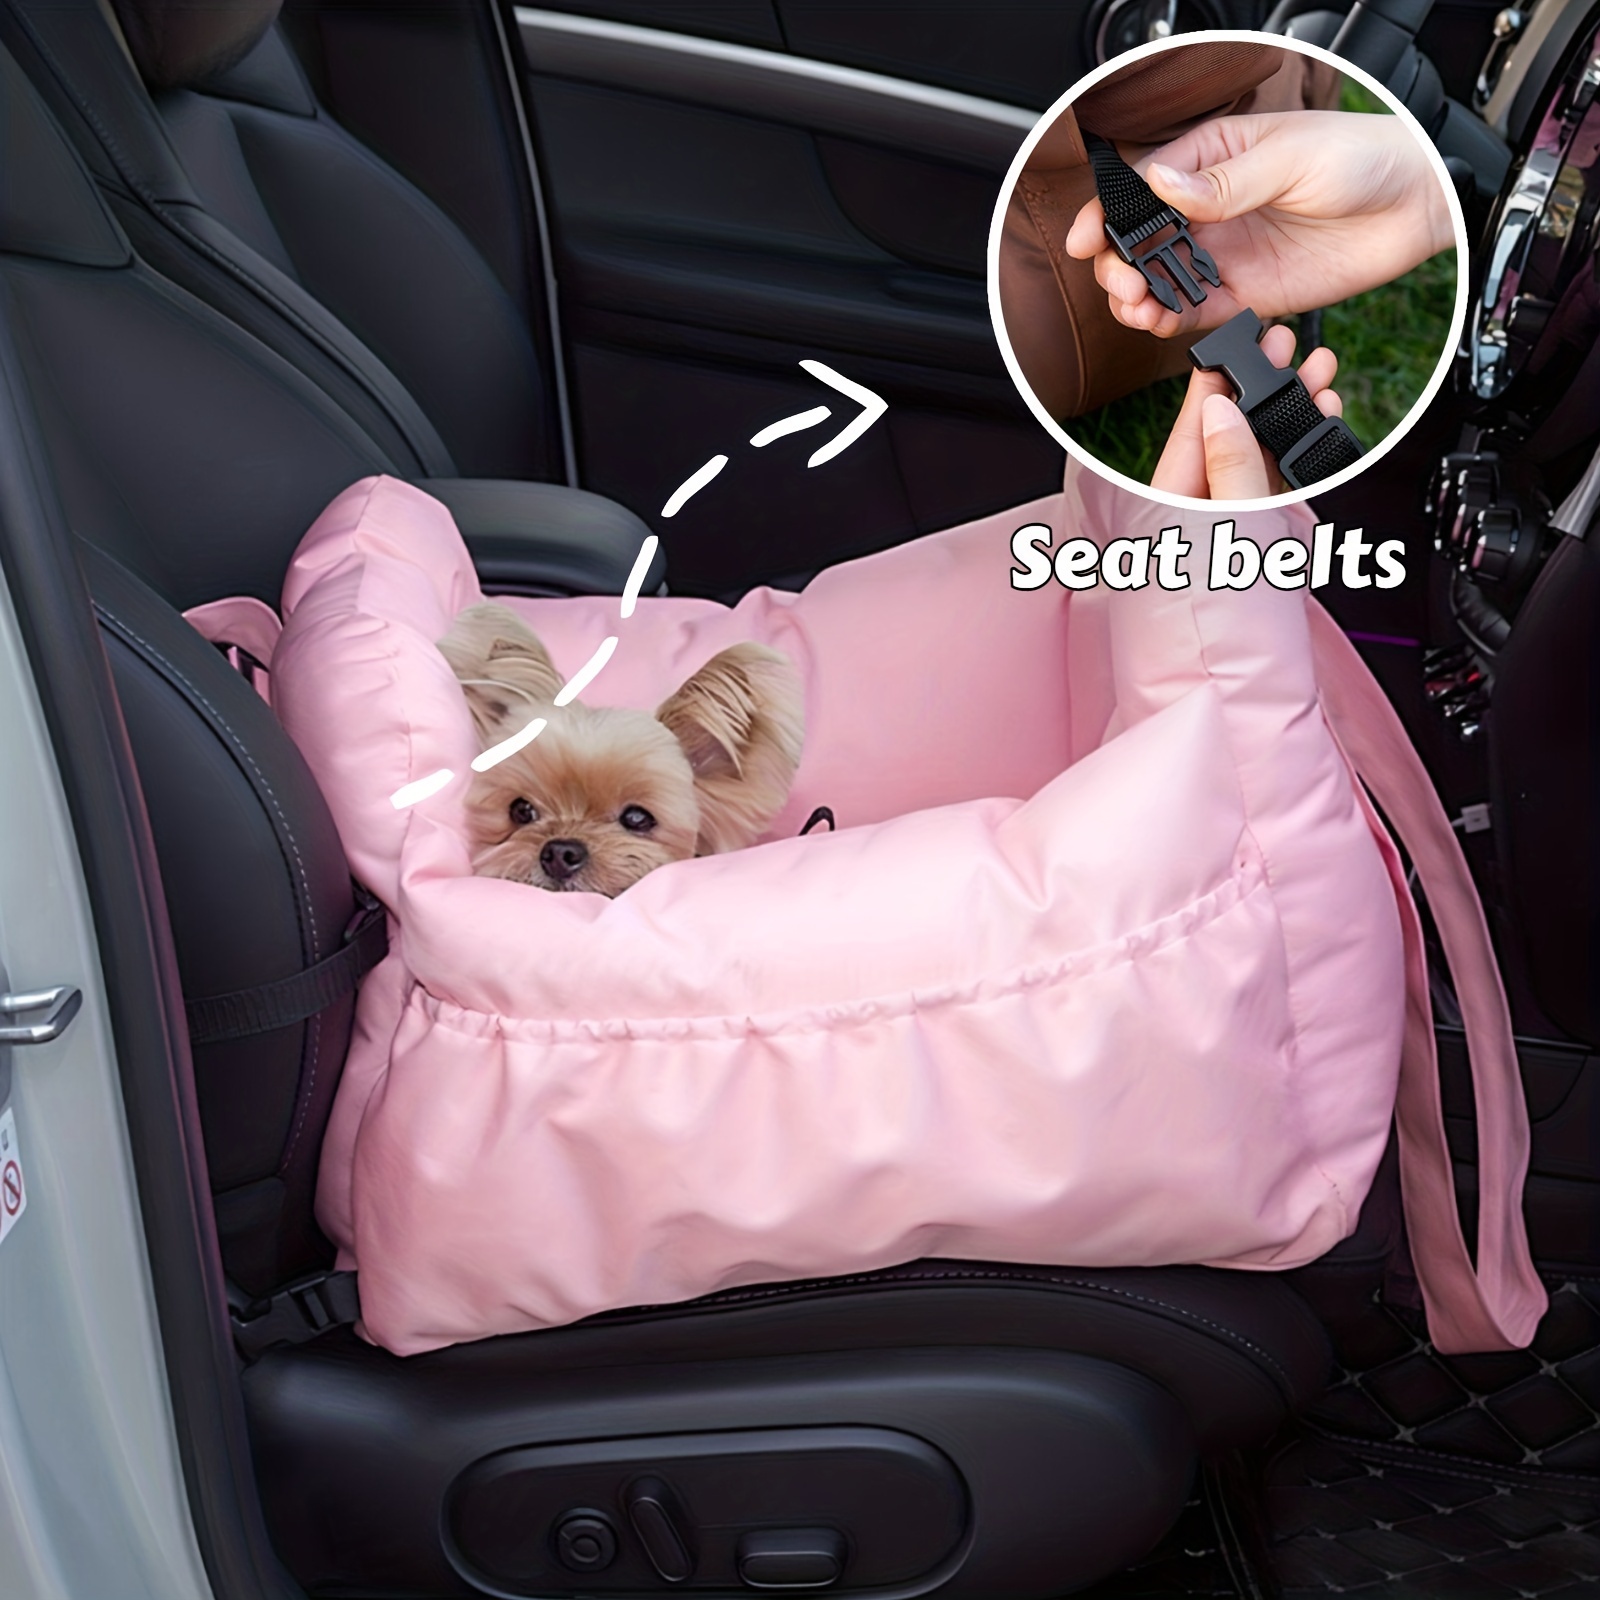 Dog Car Seats and Seat Belts: Can They Keep Your Pup Safe?